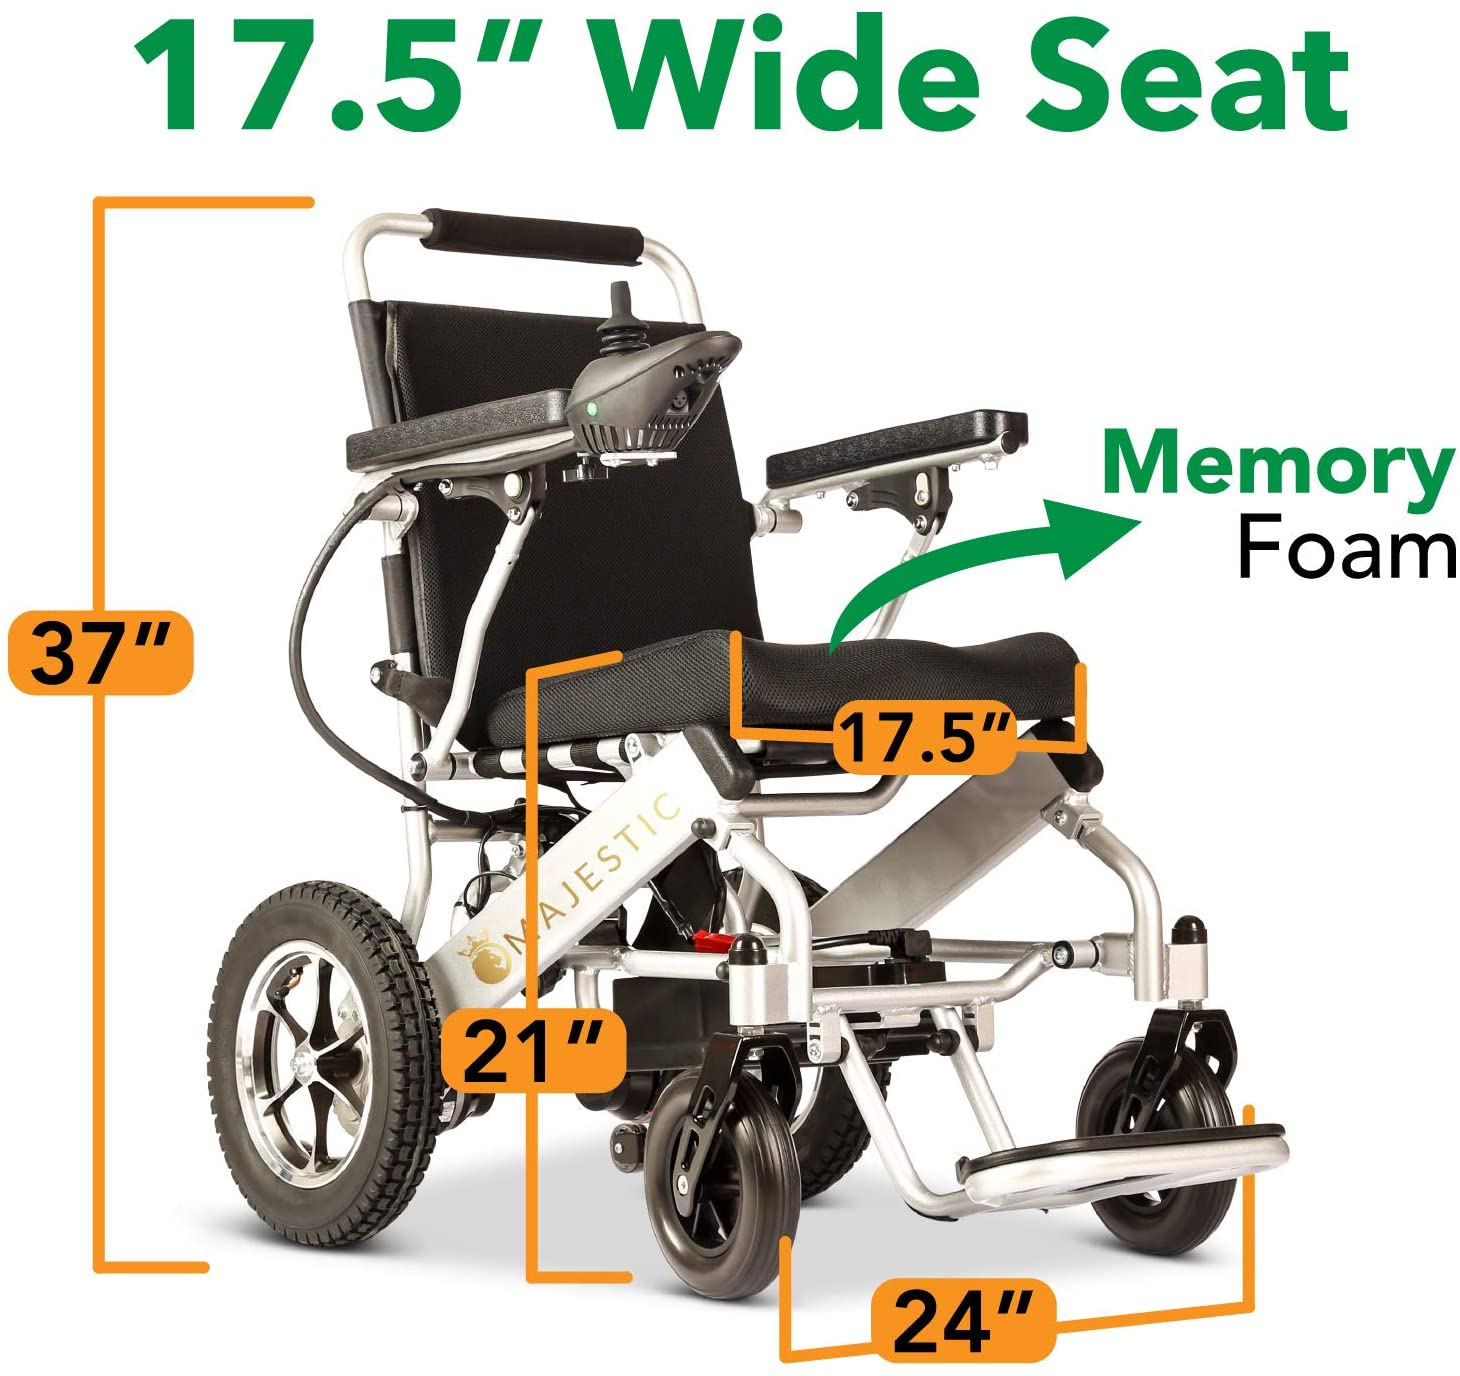 ComfyGO, ComfyGO 601-7001 Majestic Fold & Travel Lightweight Electric Power Heavy Duty Wheelchair Scooter Silver New